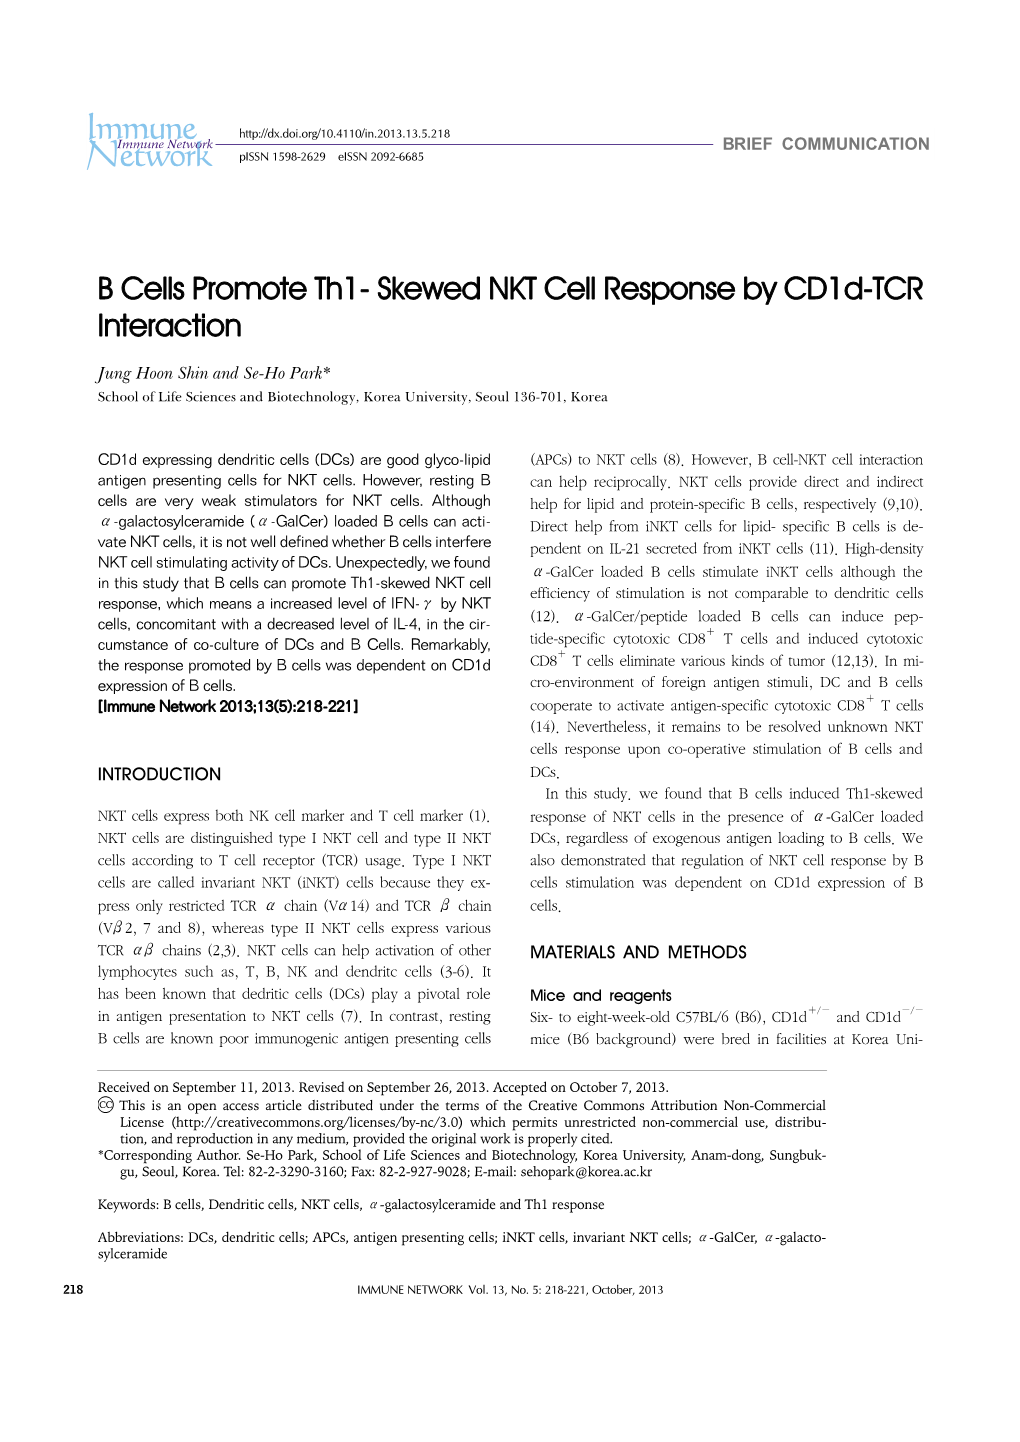 B Cells Promote Th1- Skewed NKT Cell Response by Cd1d-TCR Interaction